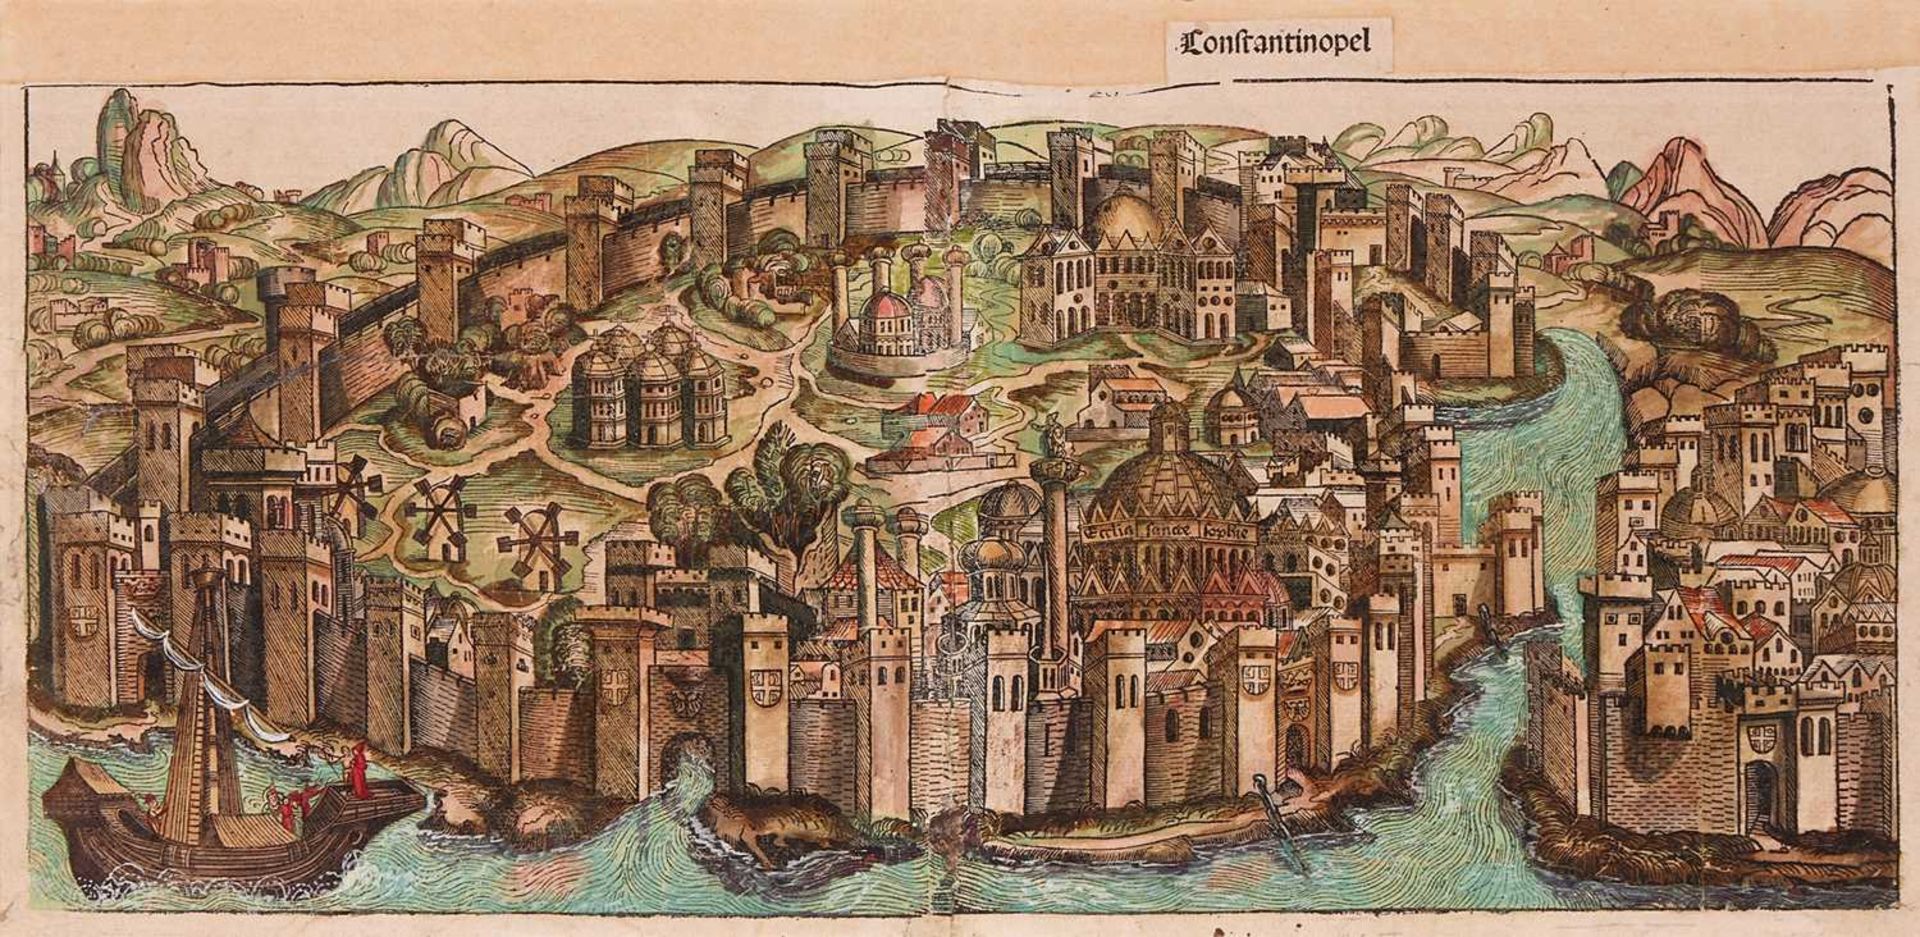 A 15TH CENTURY HAND COLOURED WOODCUT VIEW OF CONSTANTINOPLE FROM THE NUREMBERG CHRONICLE